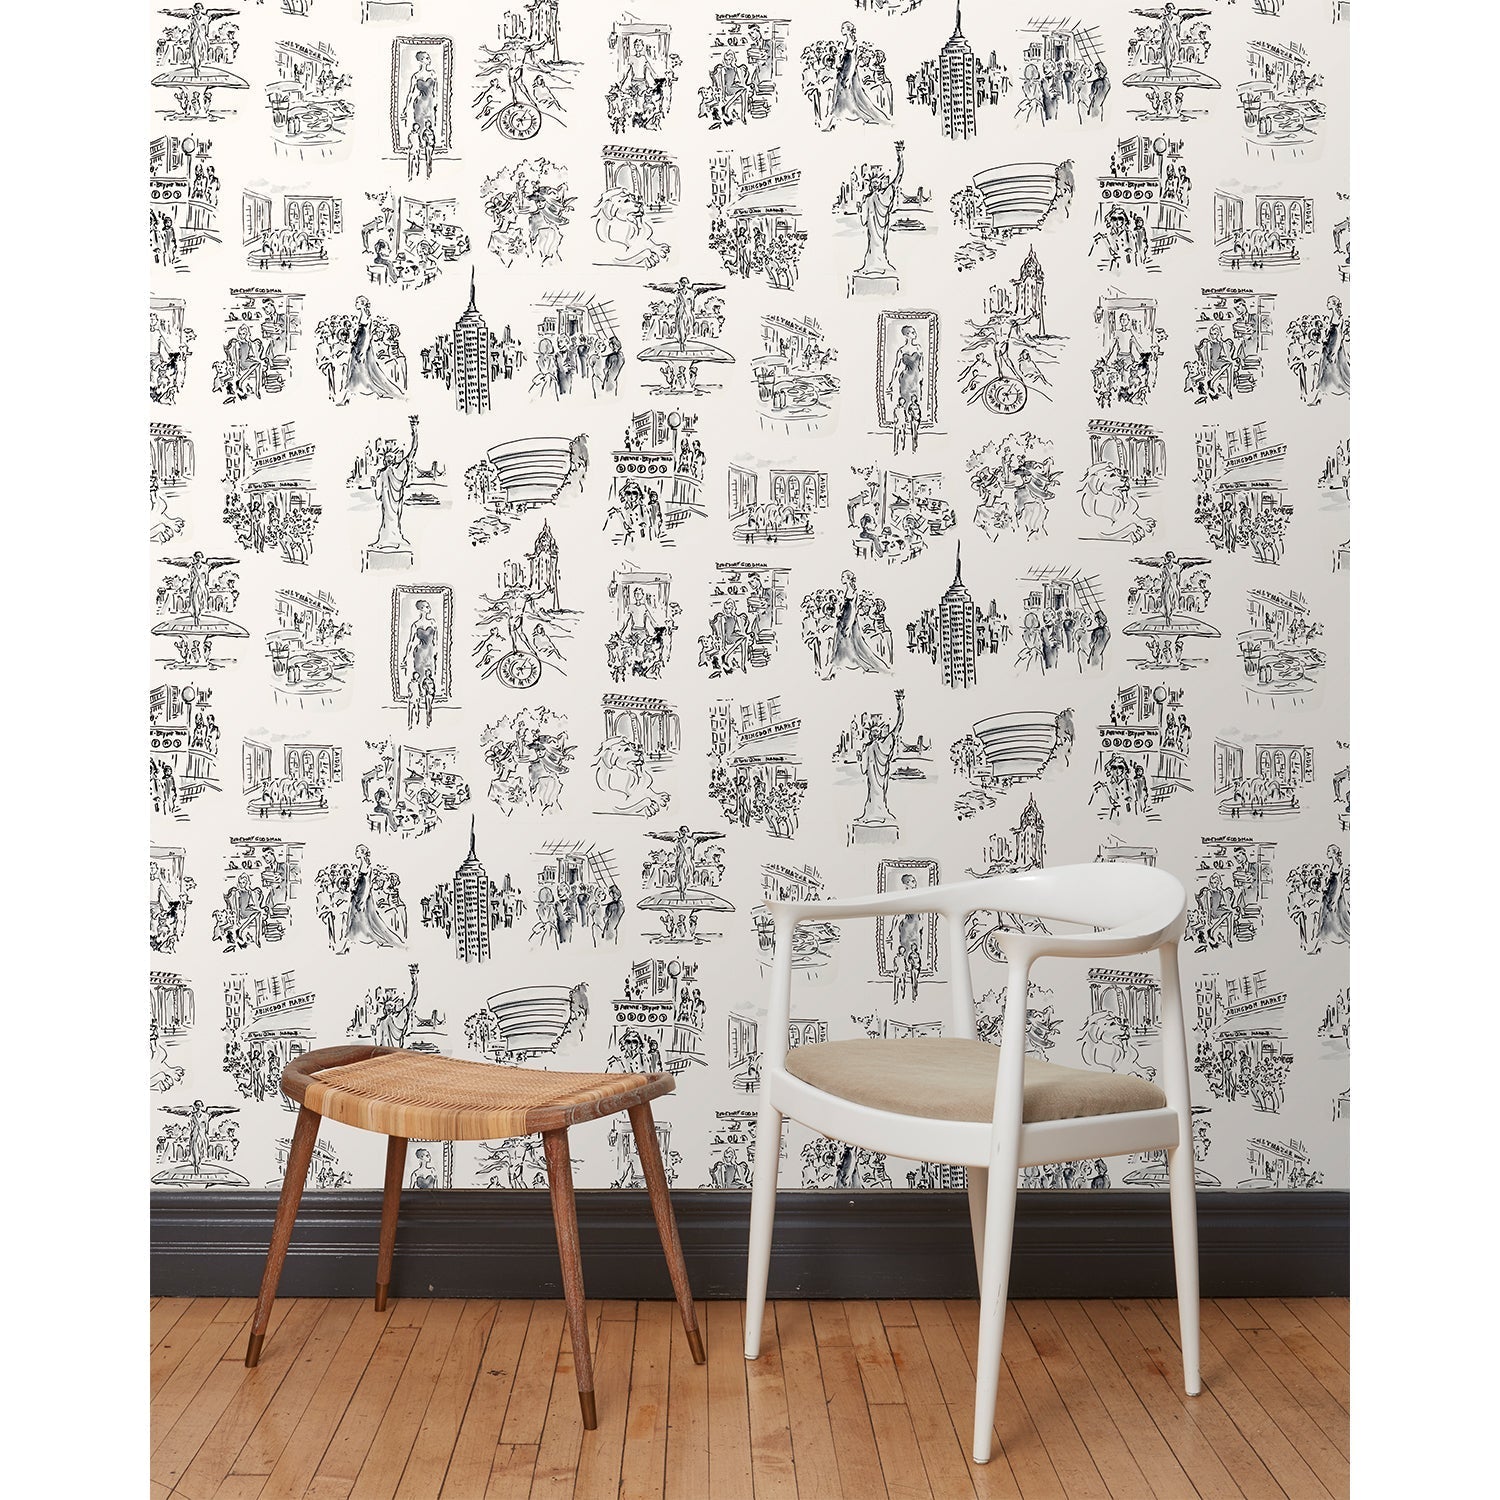 A chair and stool in front of a wall papered in a pattern of black hand-drawn illustrations of New York City landmarks on a white background.